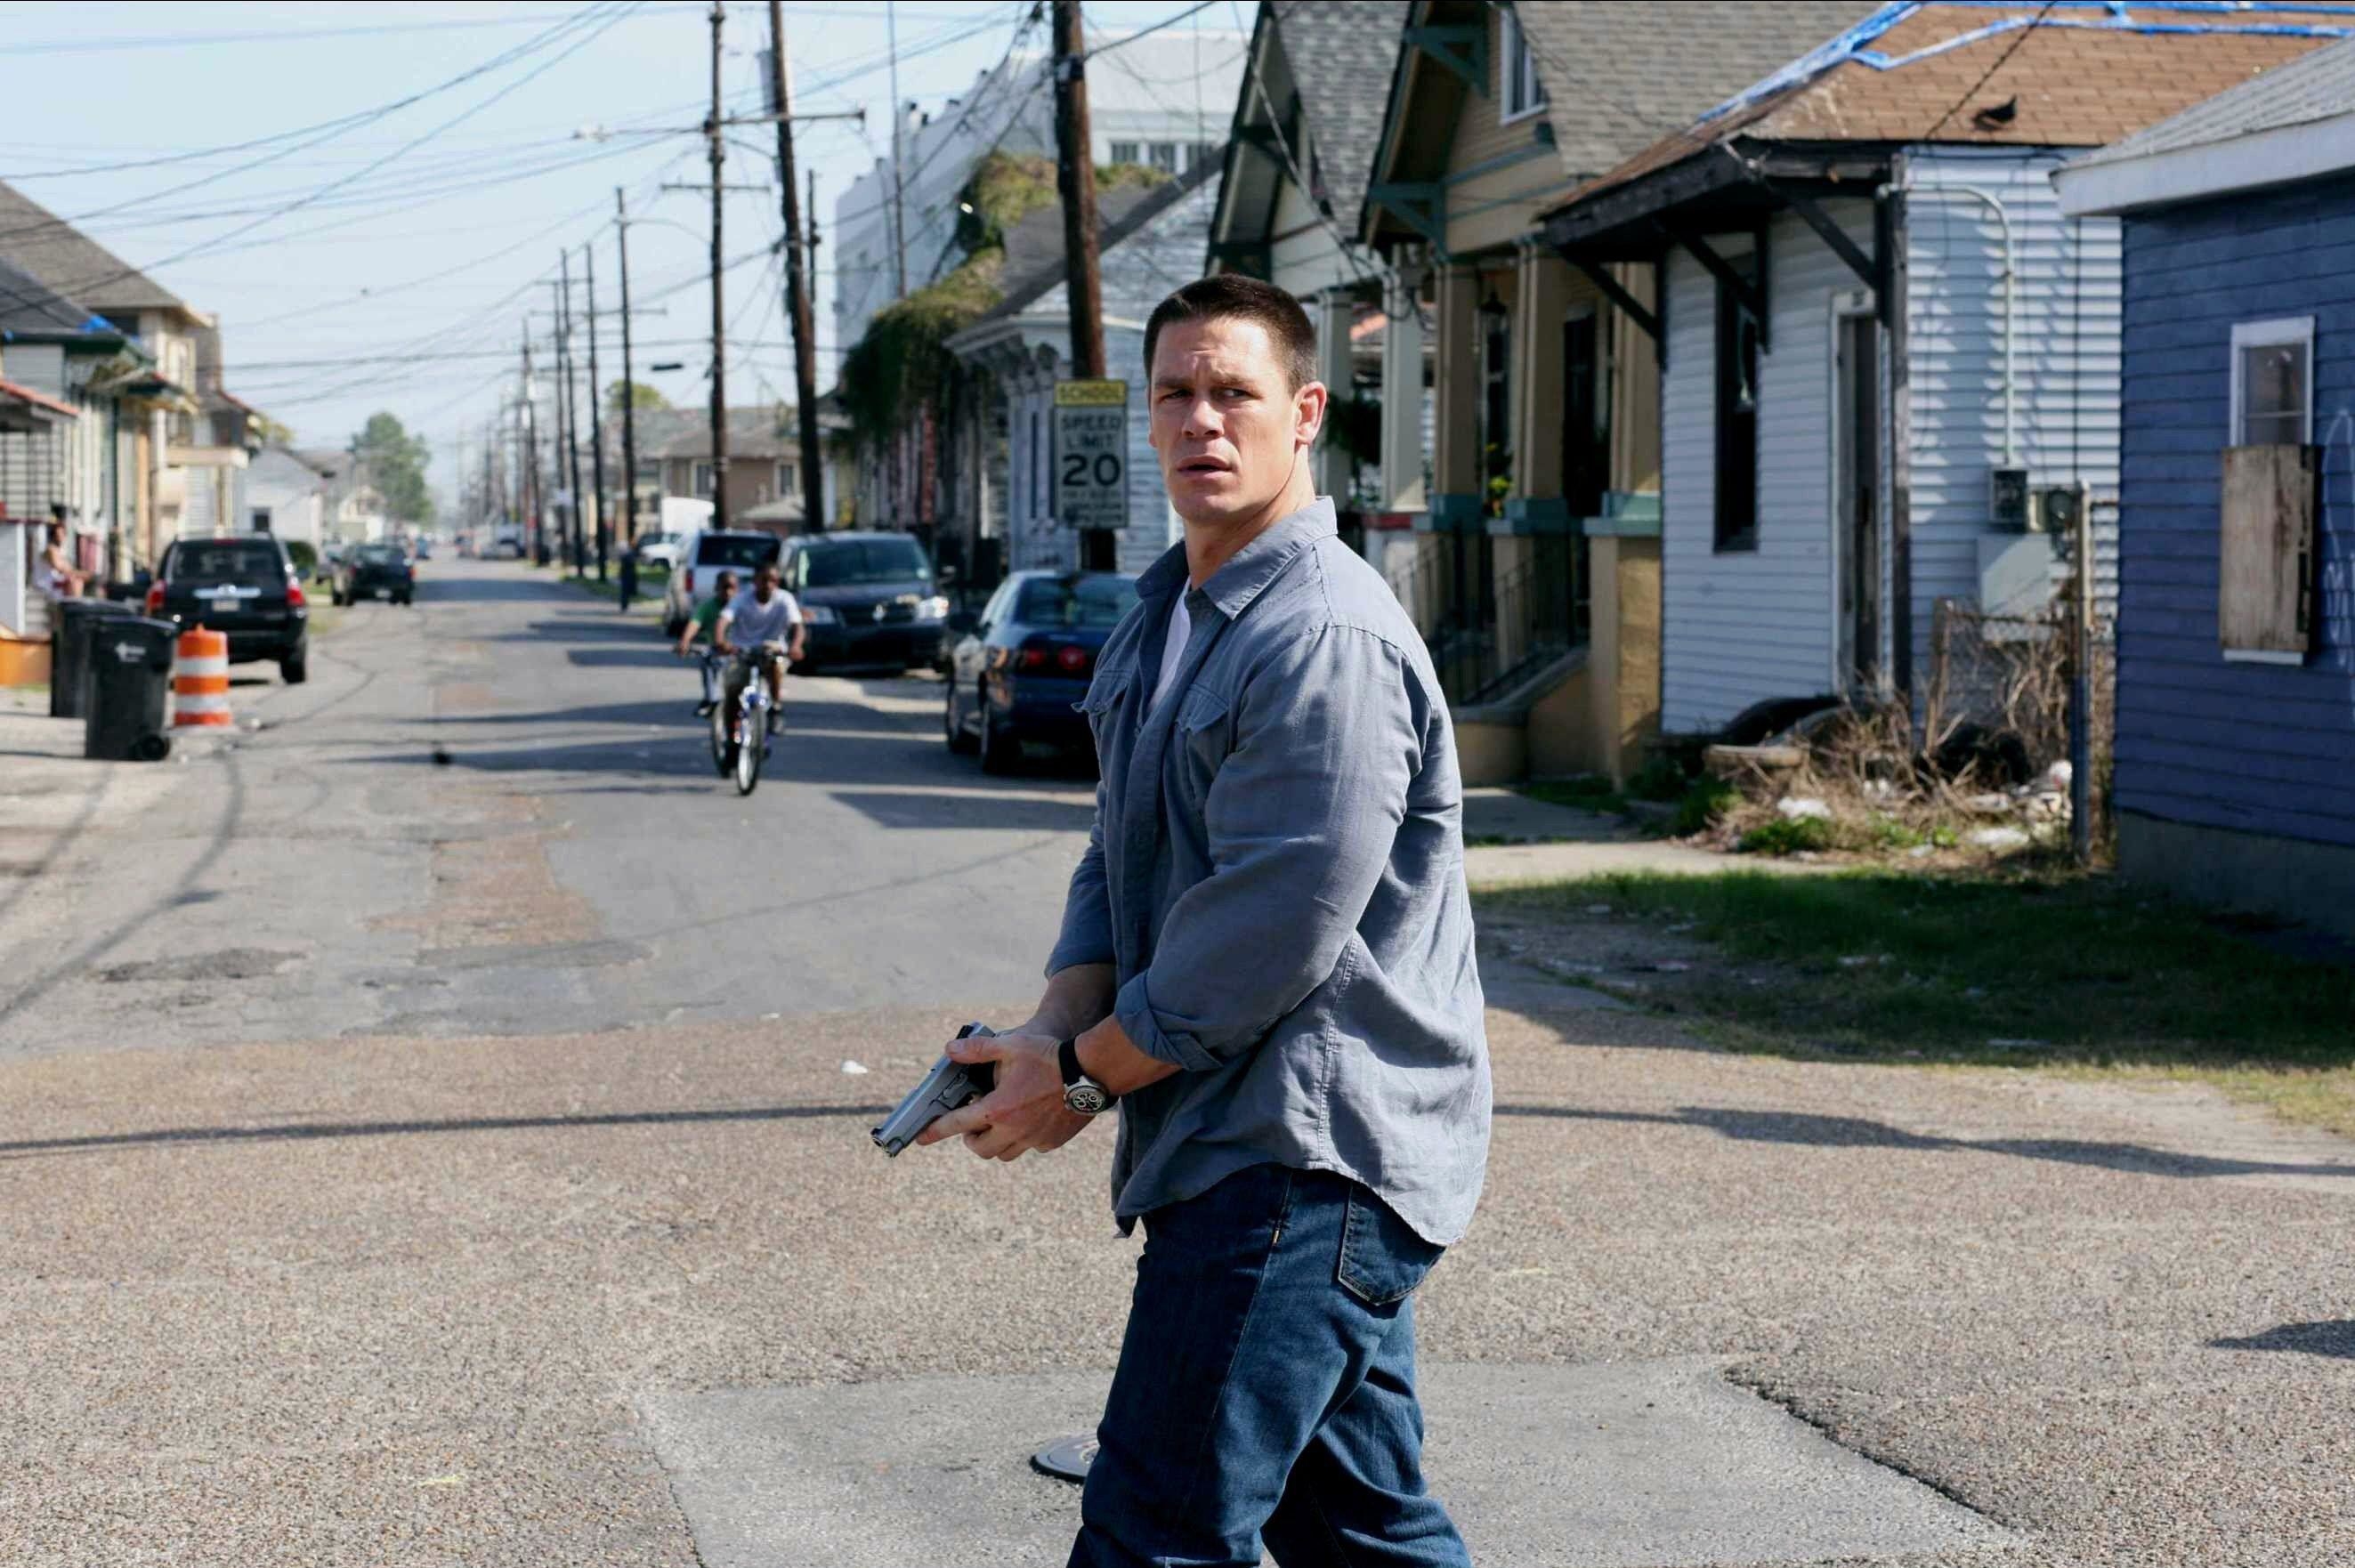 A man with a gun in denim and a button-up shirt stands with concern in the middle of a street